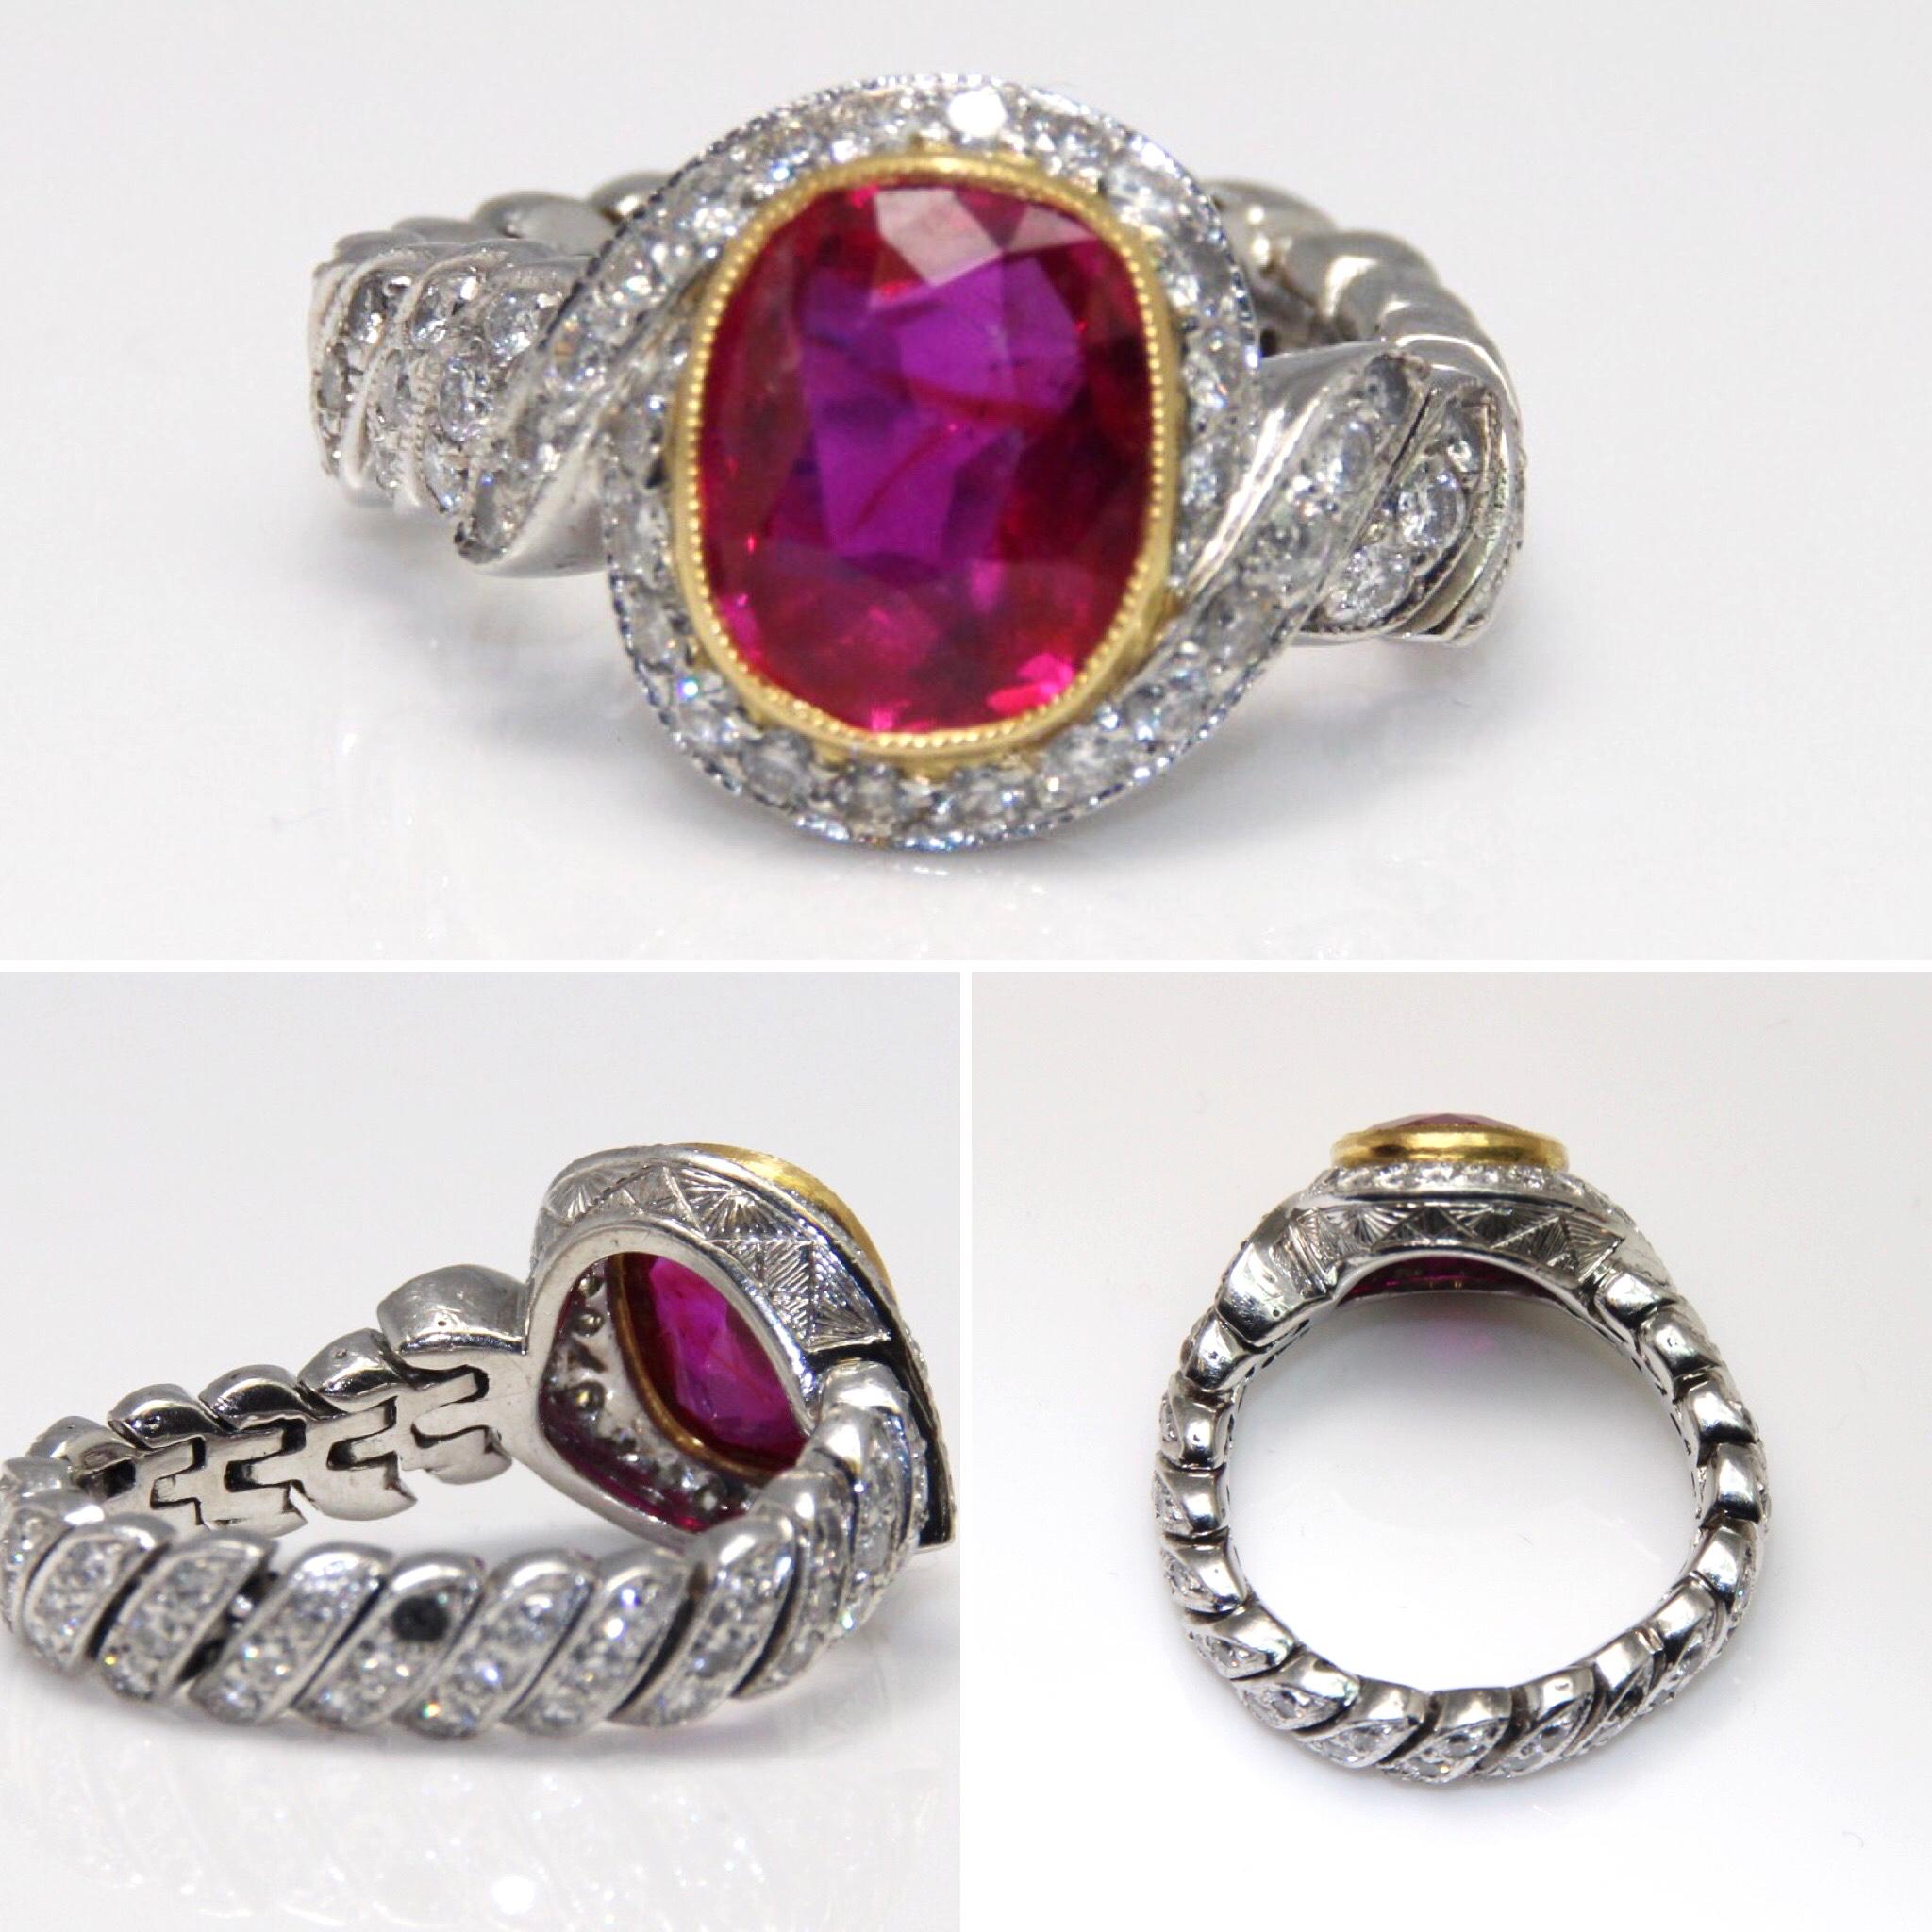 Cushion Cut Natural Certified Burma Ruby and Diamond Unusual Ring Weighing 2.76 Carat For Sale